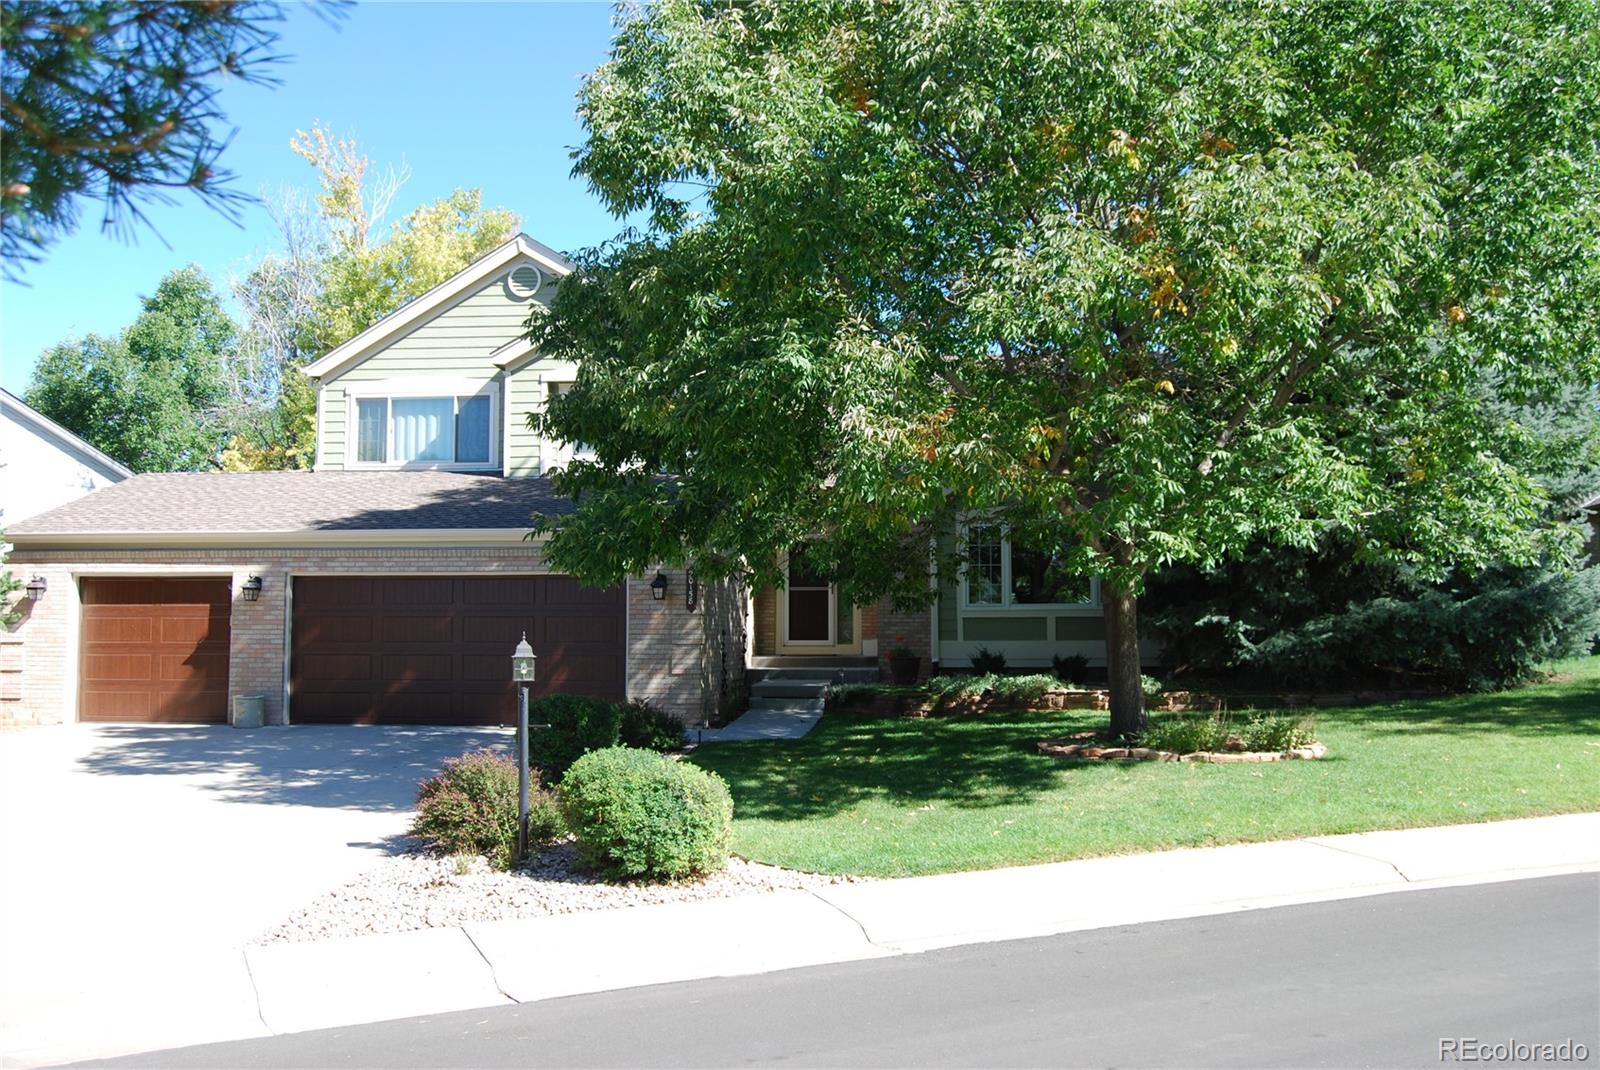 Report Image for 20158  Aintree Court,Parker, Colorado